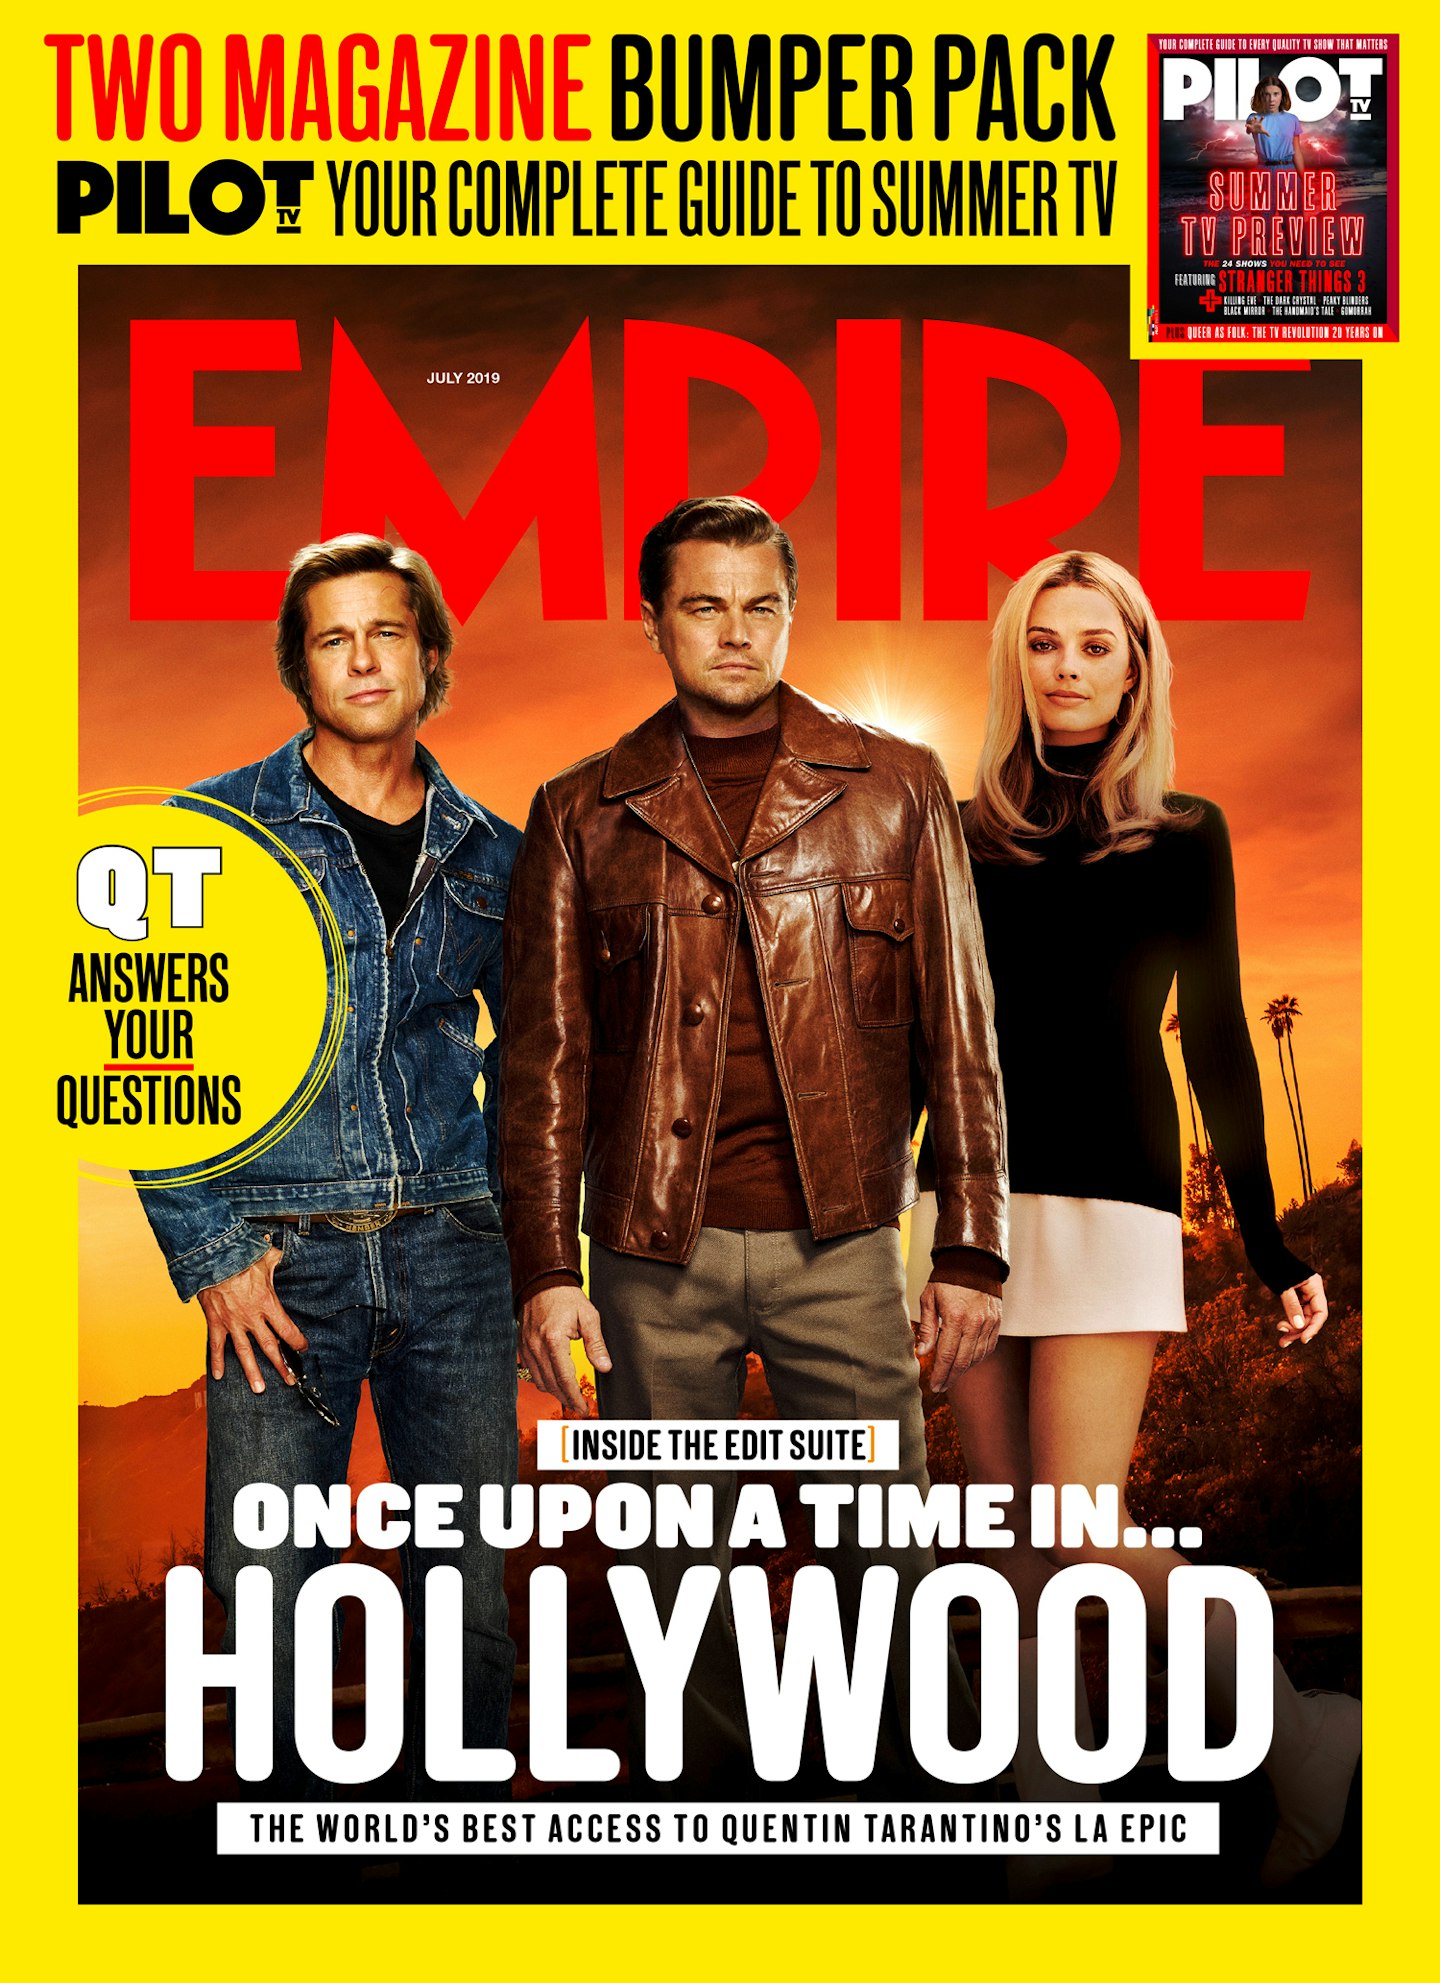 Once Upon A Time In Hollywood Explained: Empire's Guide To The Film